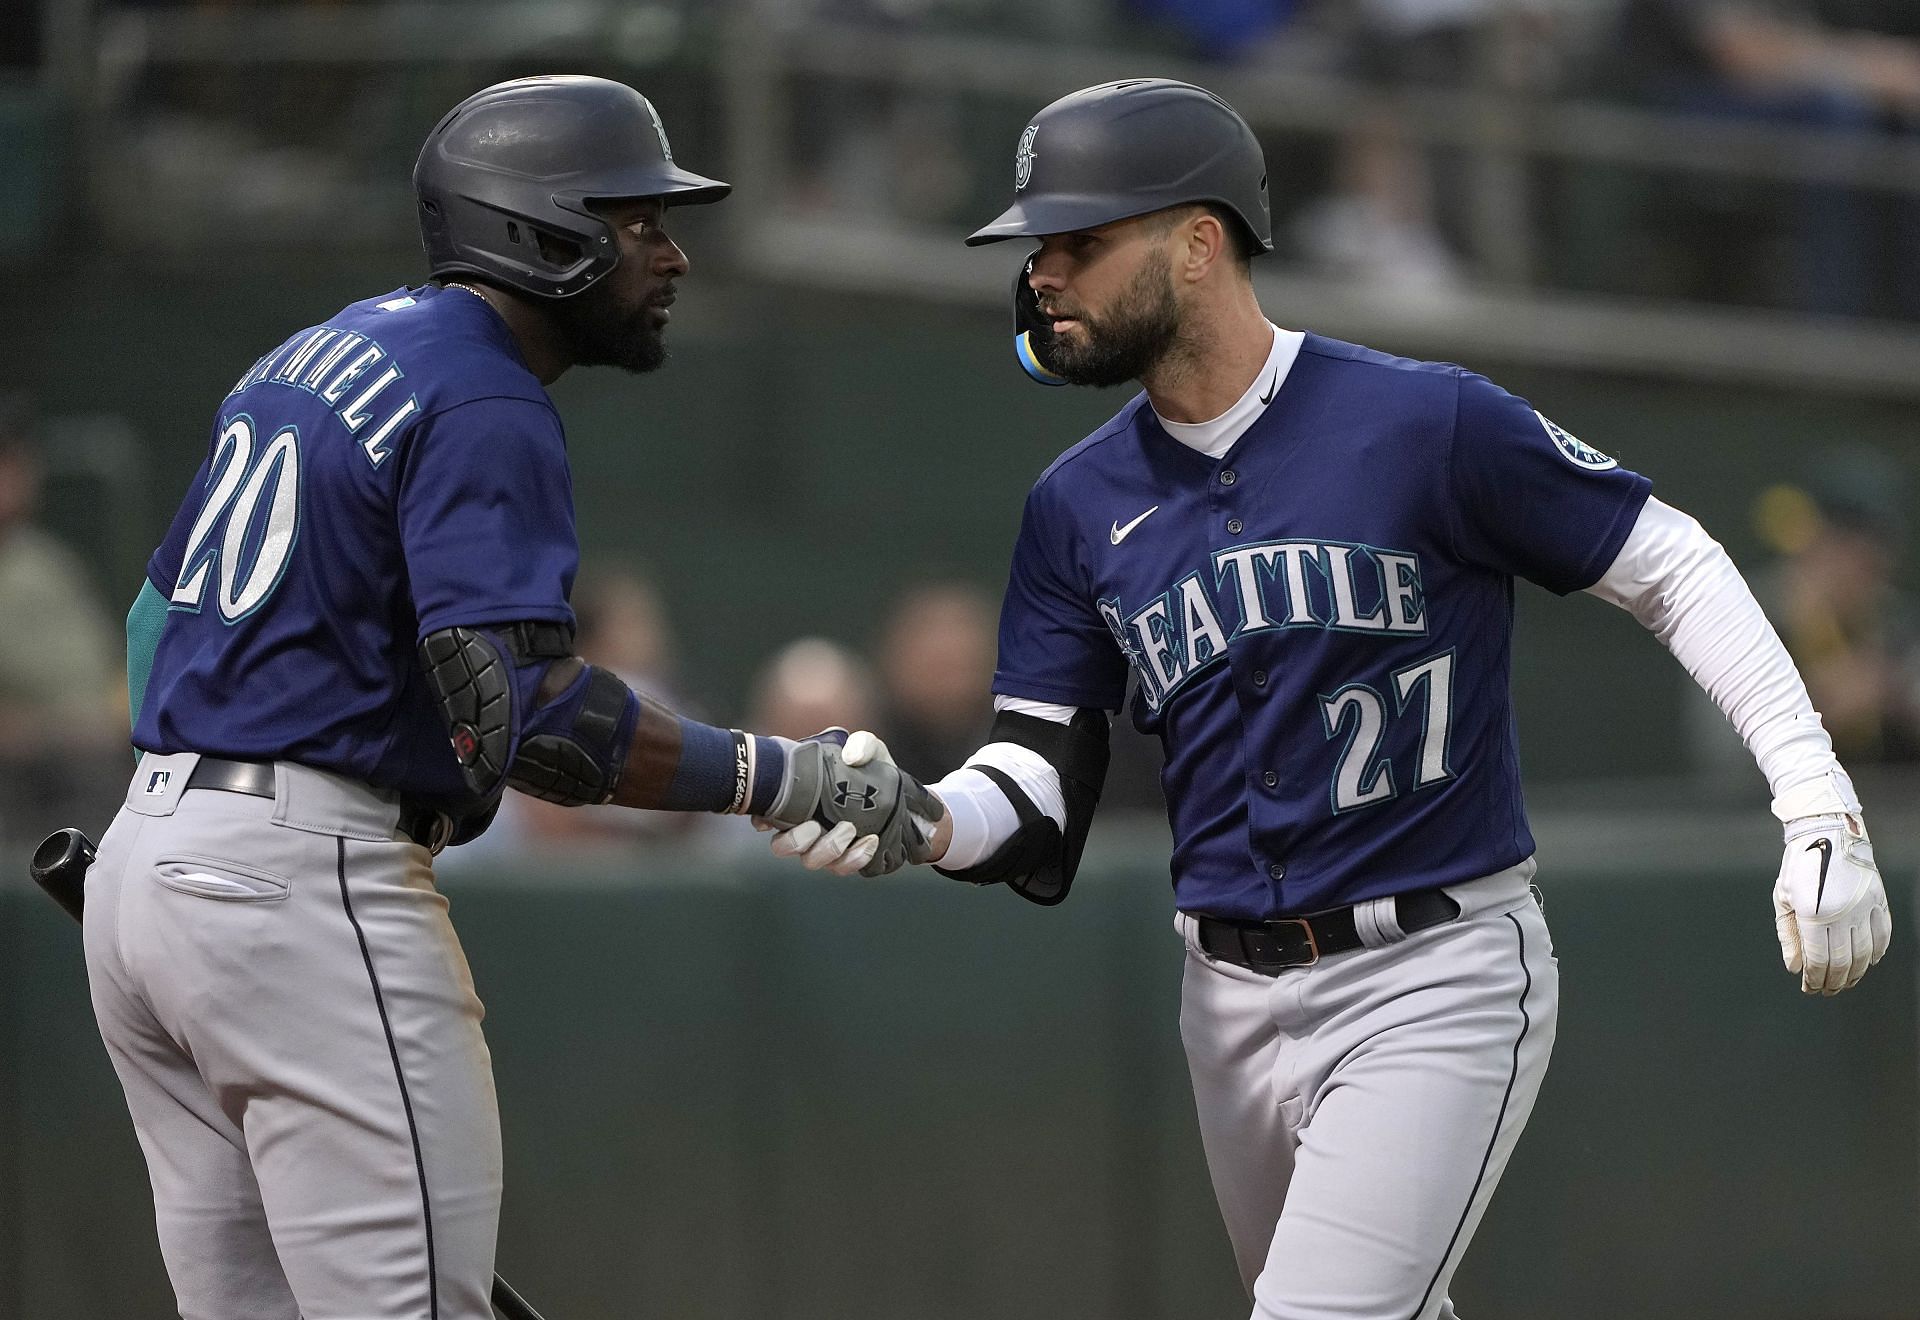 Why Benches-Clearing MLB Brawl Led to Mariner Jesse Winker Scoring a Pizza  - InsideHook